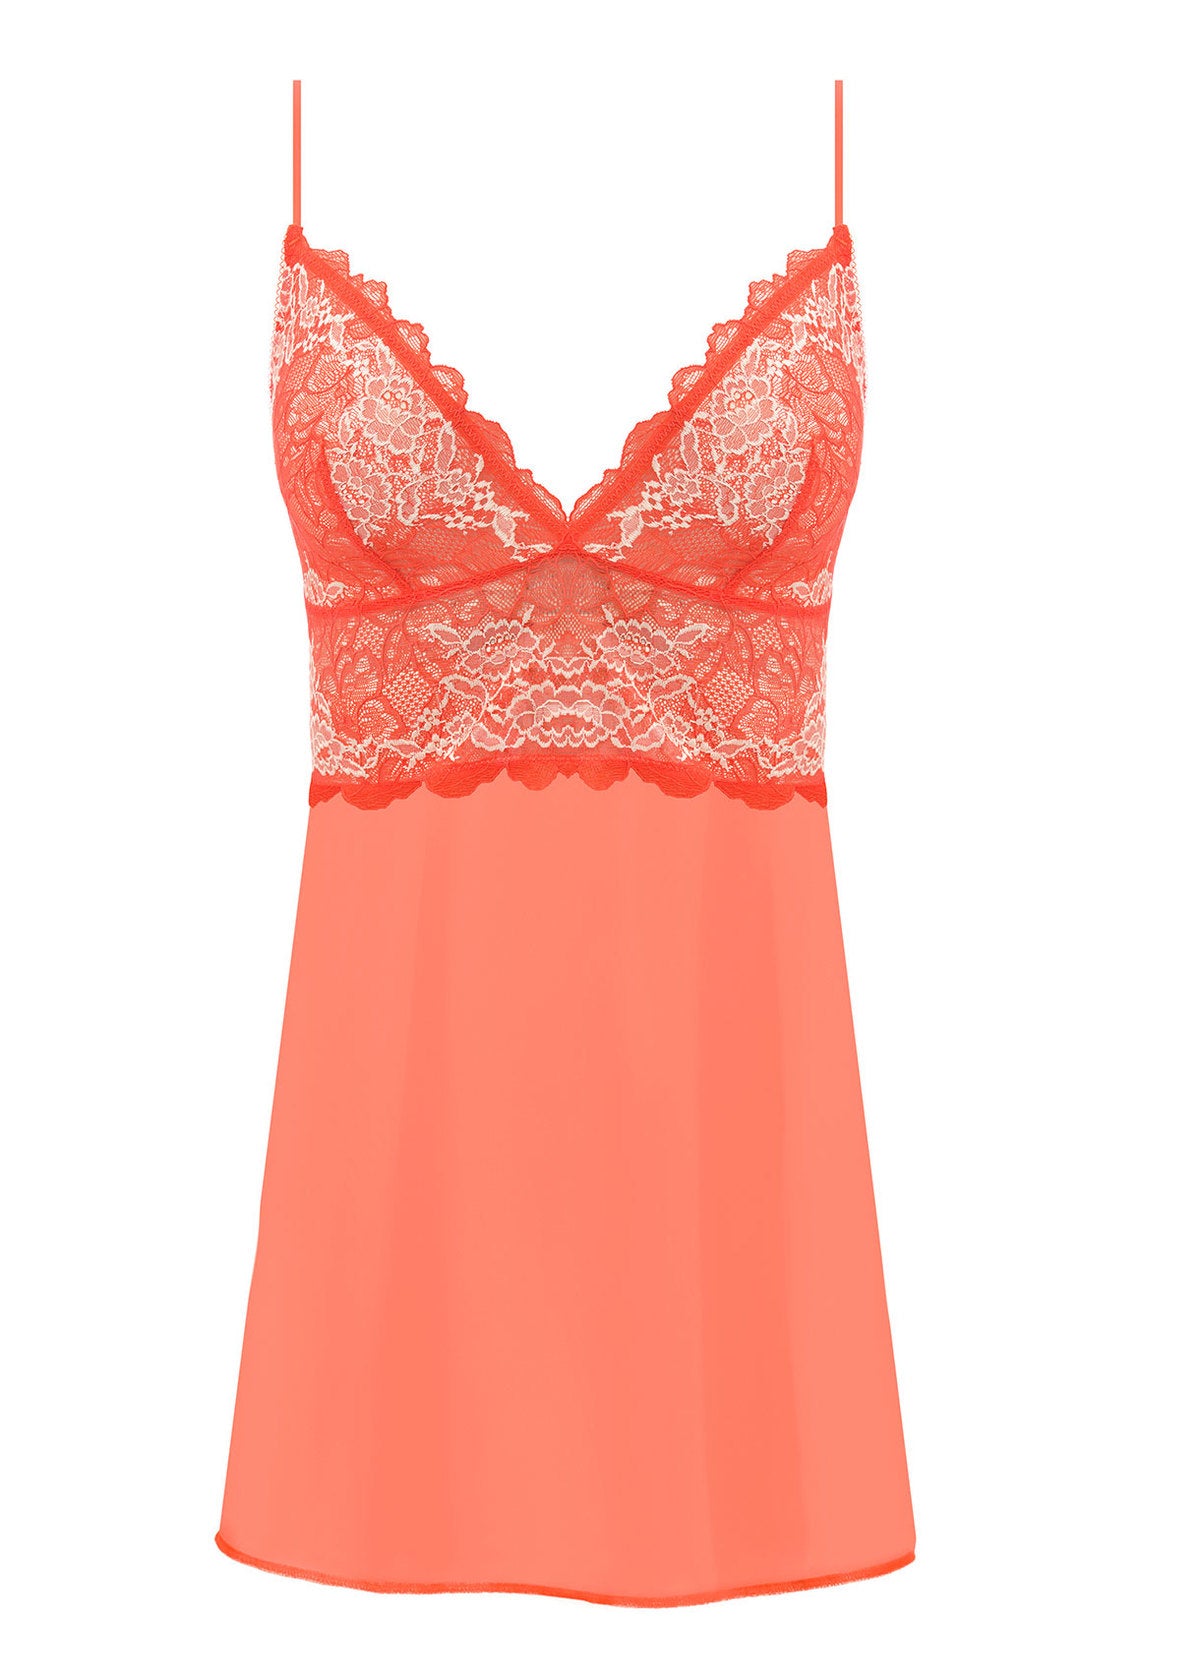 WACOAL Lace Perfection Chemise WE135009 - Fiesta